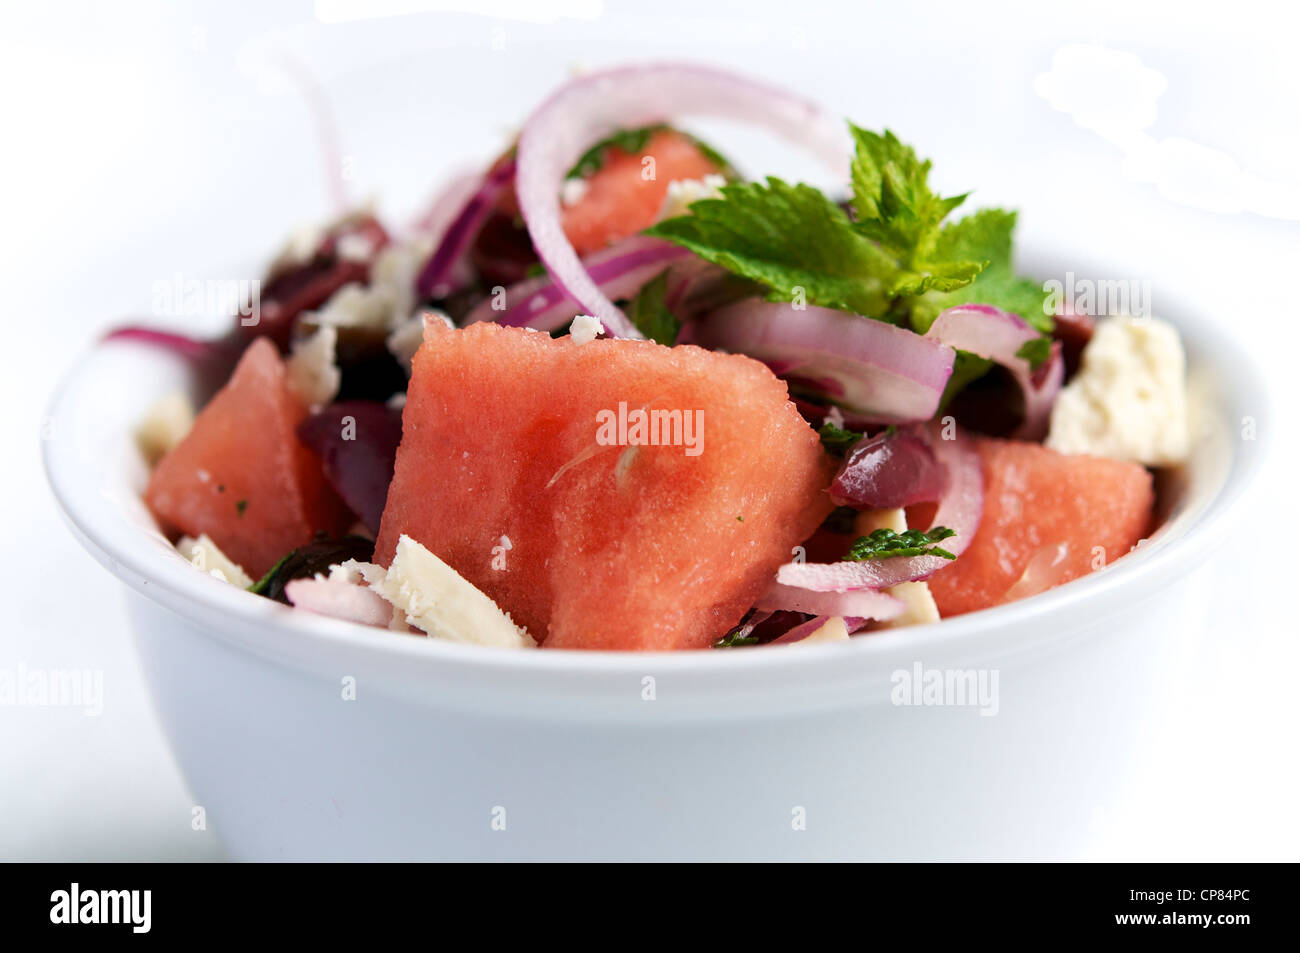 A refreshing summer time salad with watermelon, black olives, red onion and soy cheese. Stock Photo